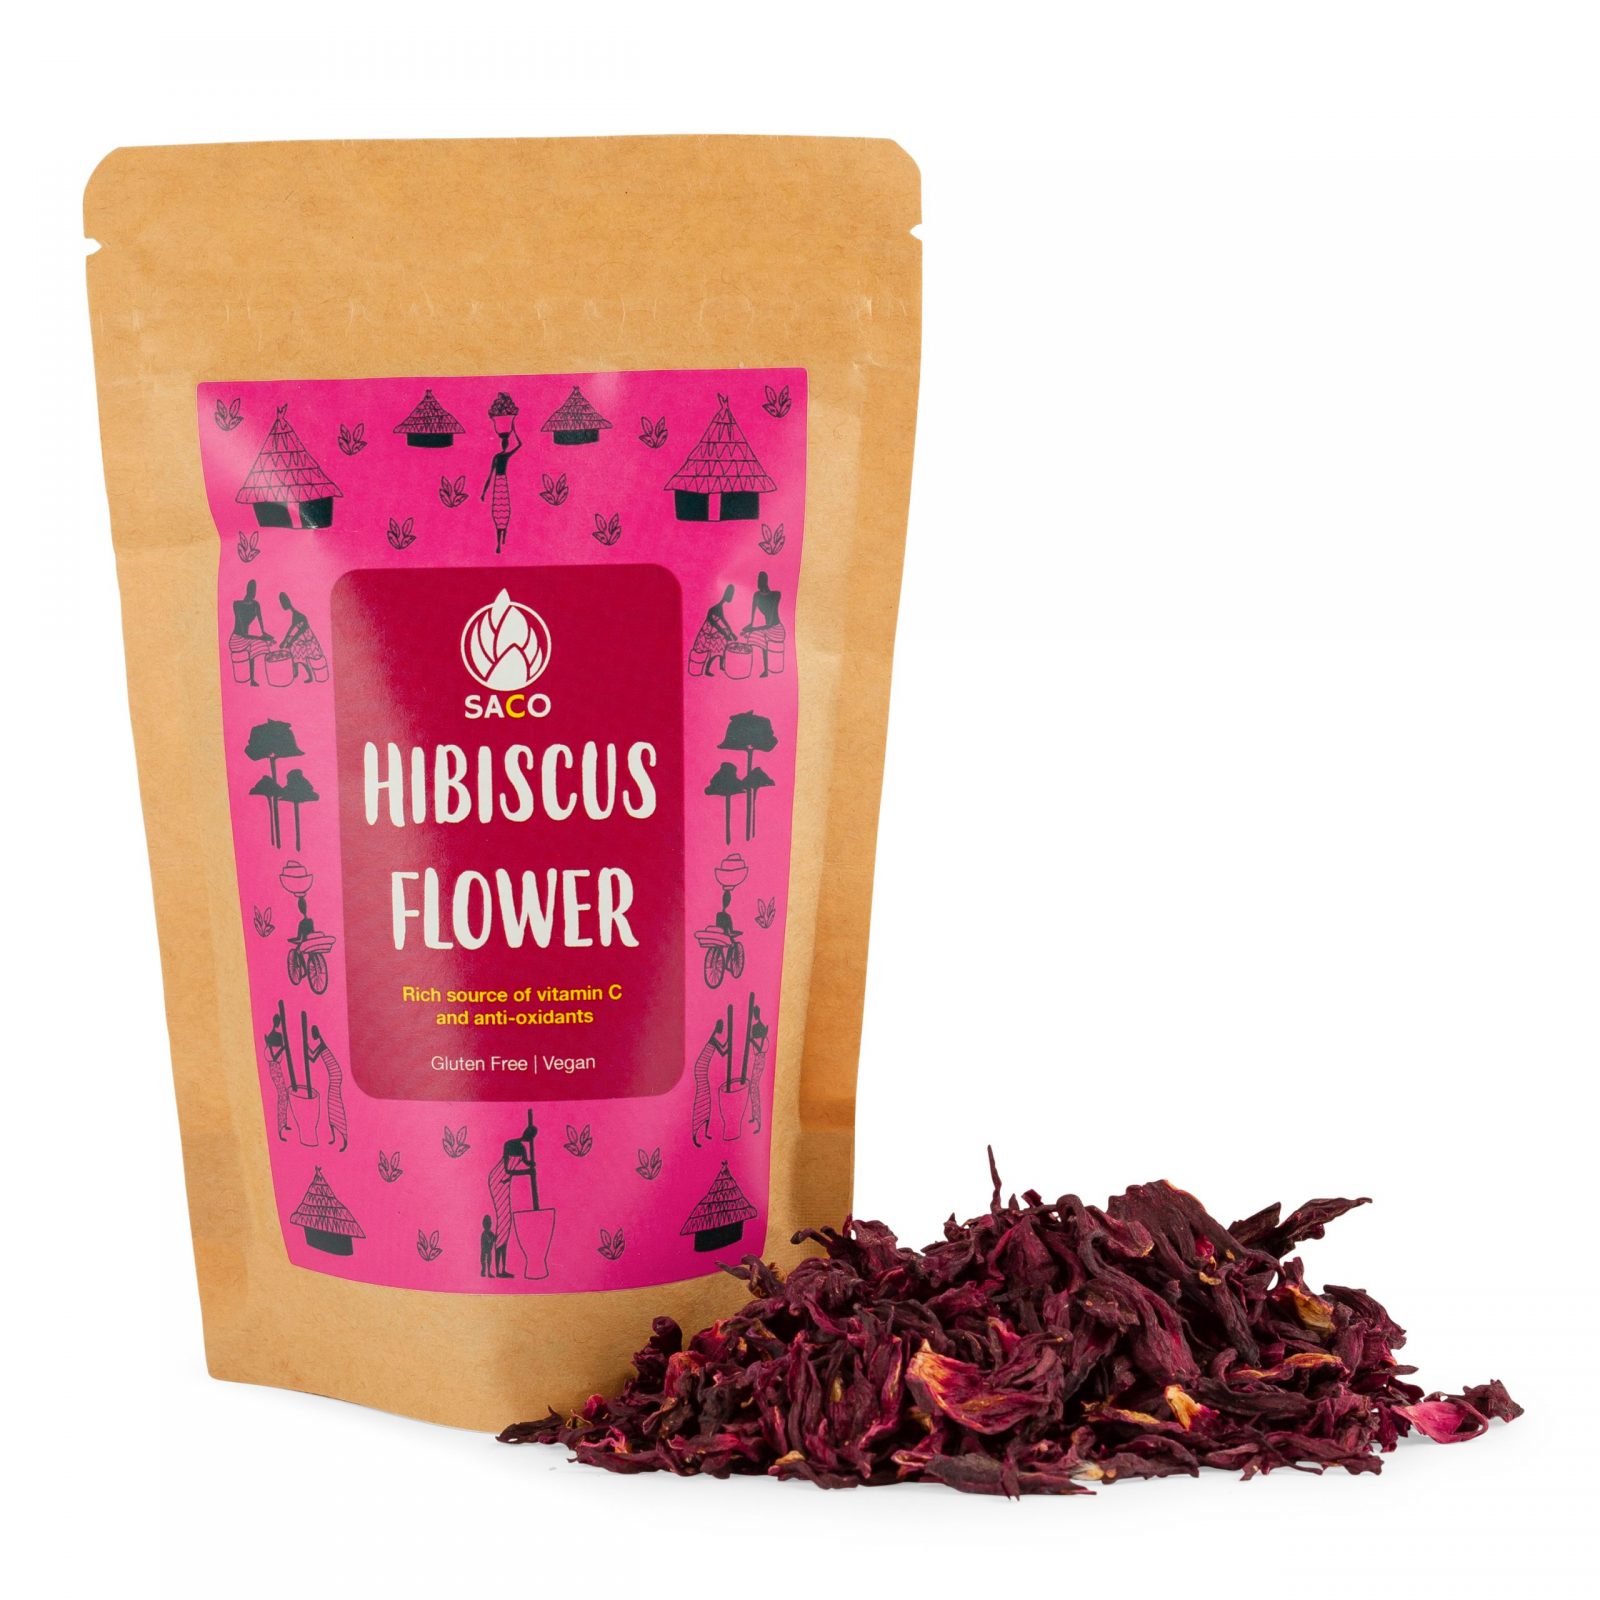 SACO Hibiscus Flower Natural Loose Leaf Tea 60g Ginger and Spice